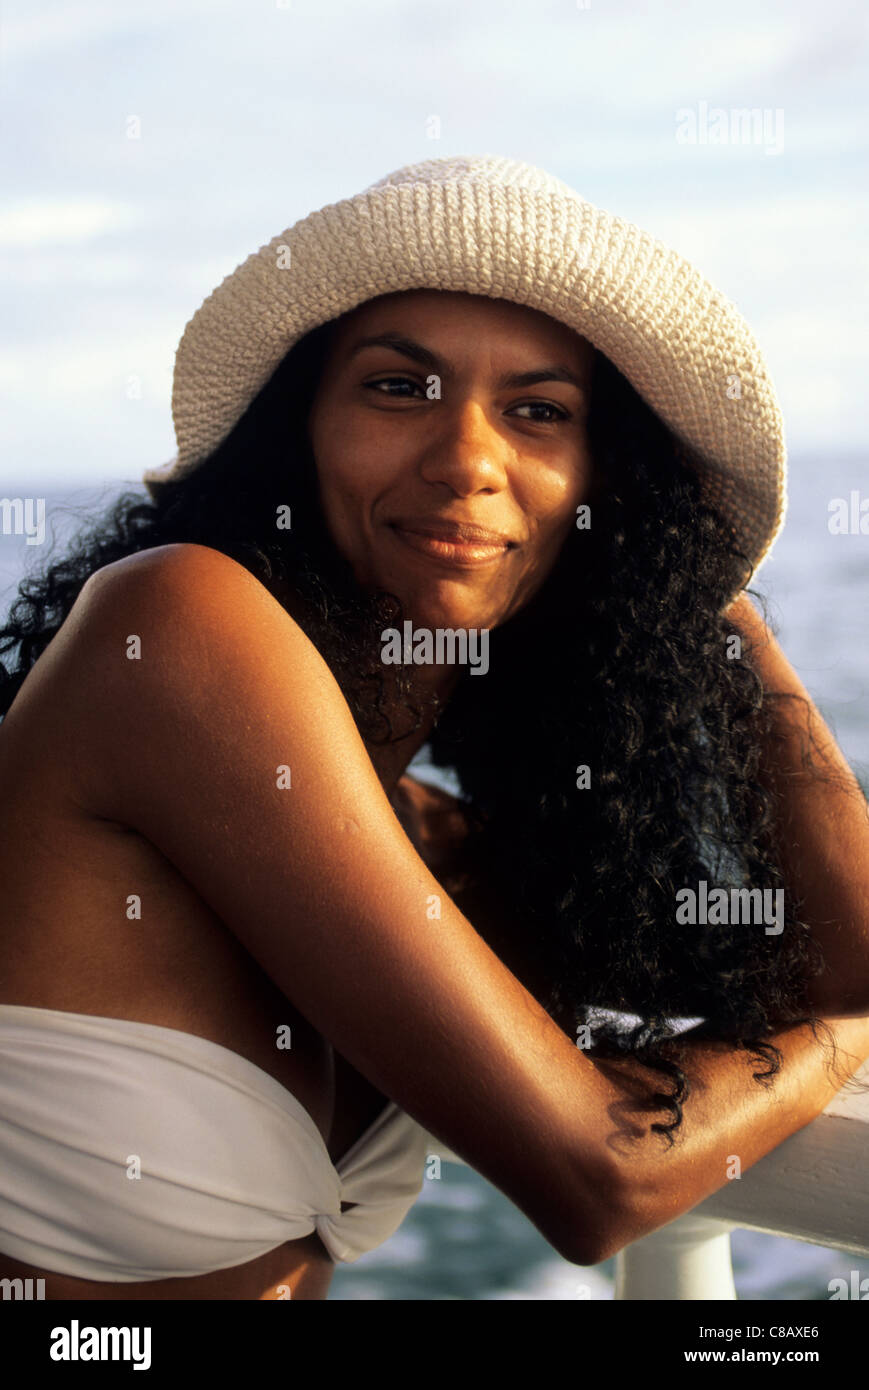 Bahia, Brazil. Smiling young woman with curly black hair in a straw sunhat and white strapless bikini. Stock Photo